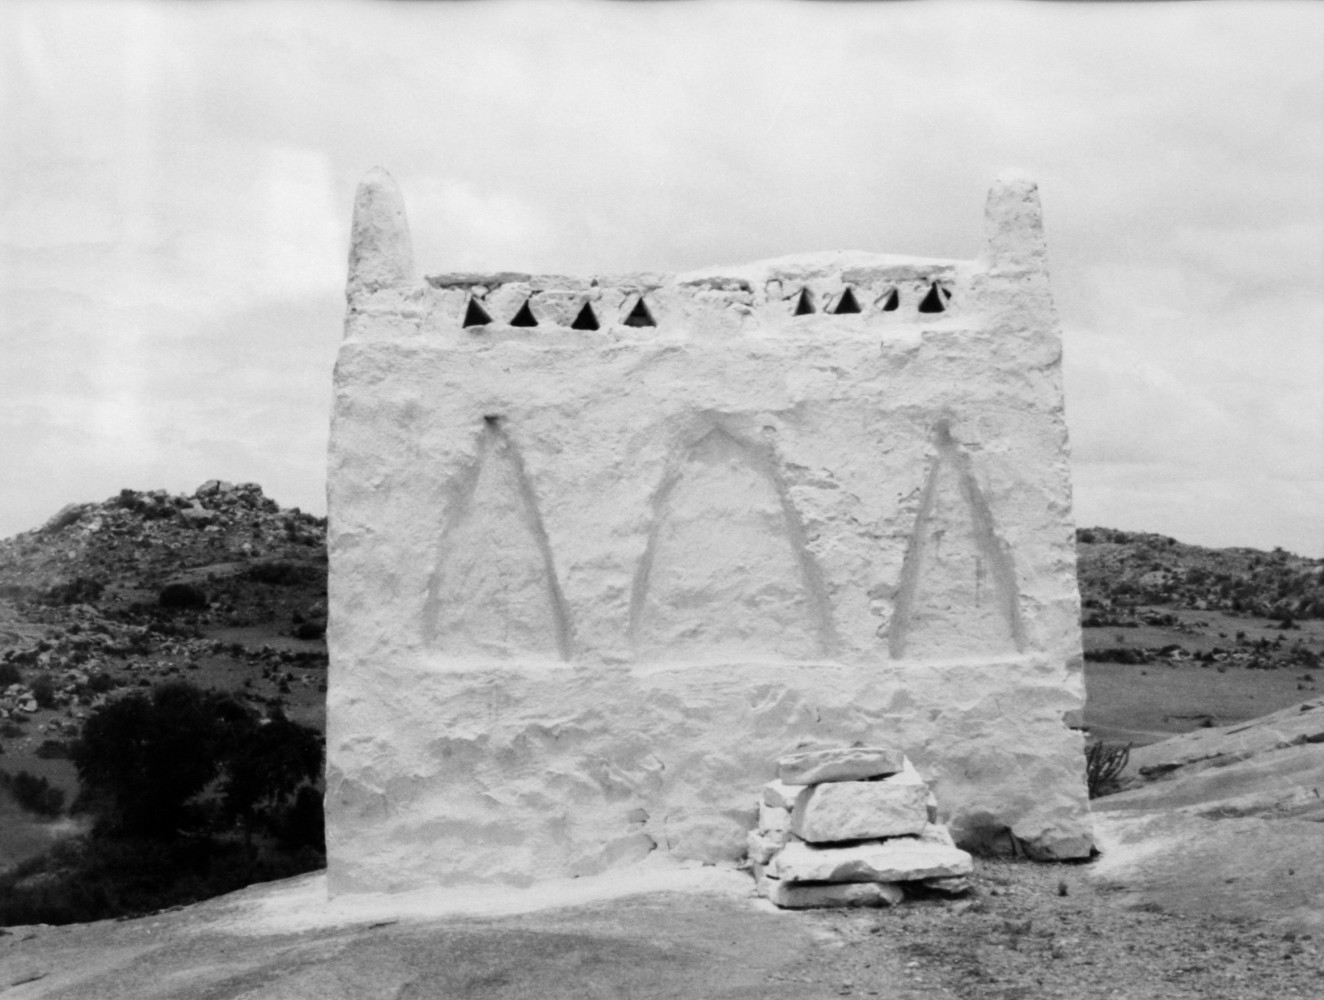 Wolfgang Laib, ‘Grave near Hospet, South India’, 2001, Gelatin silver print on baryta paper